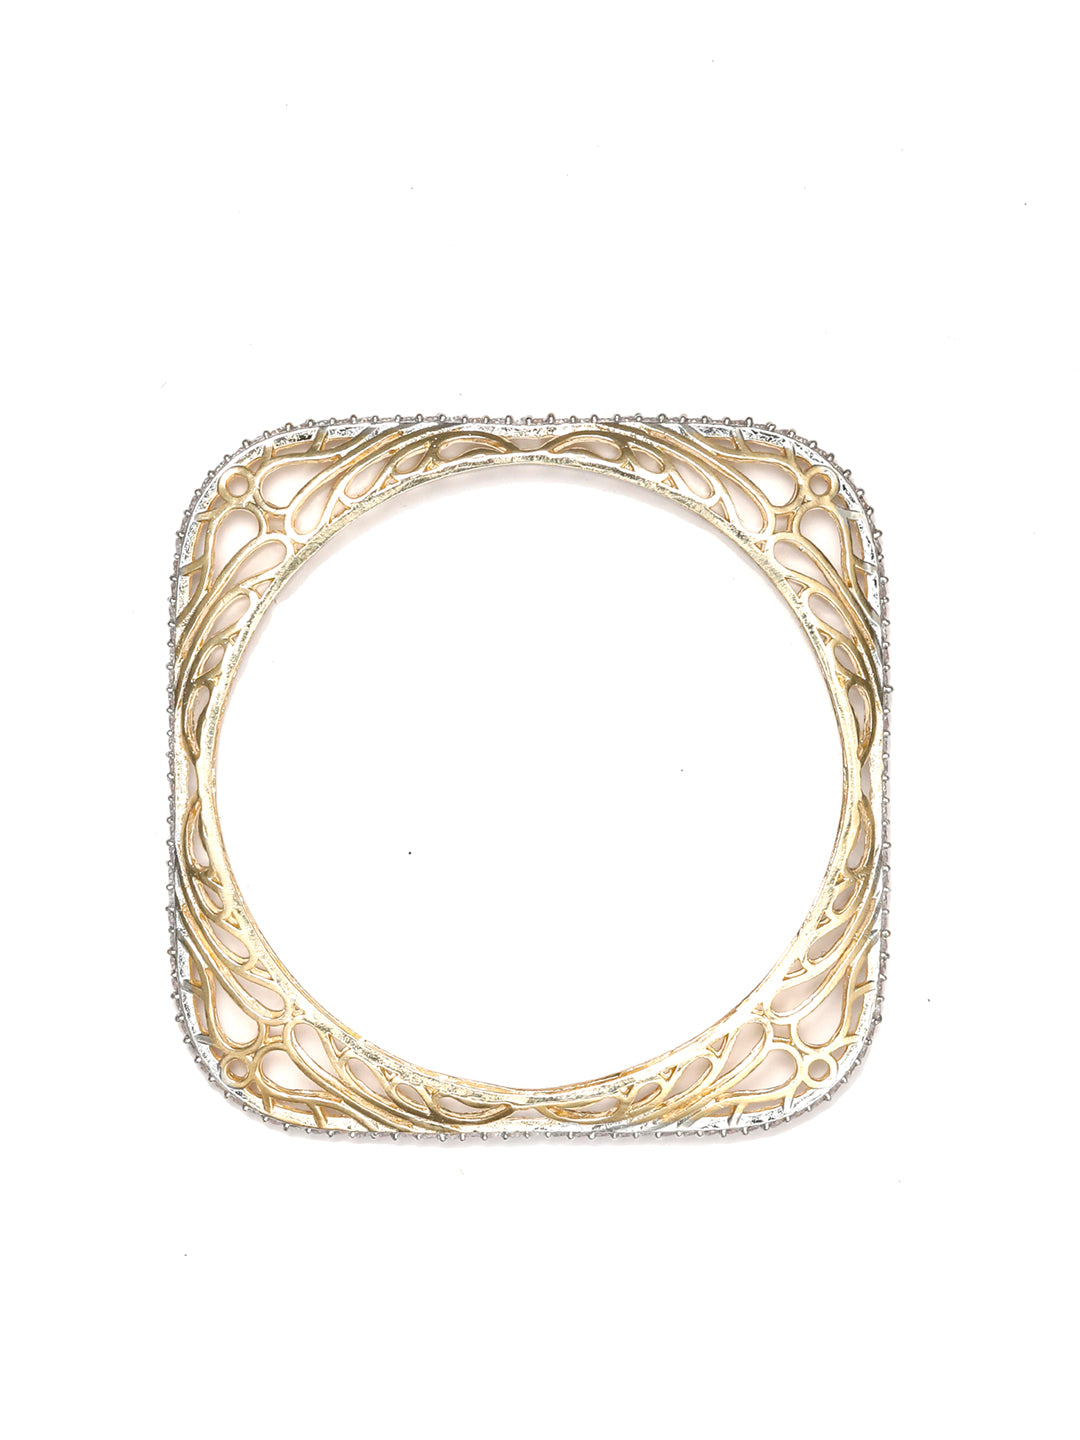 Allure Wings - Square American Diamond Gold Plated Set of 2 Bangles